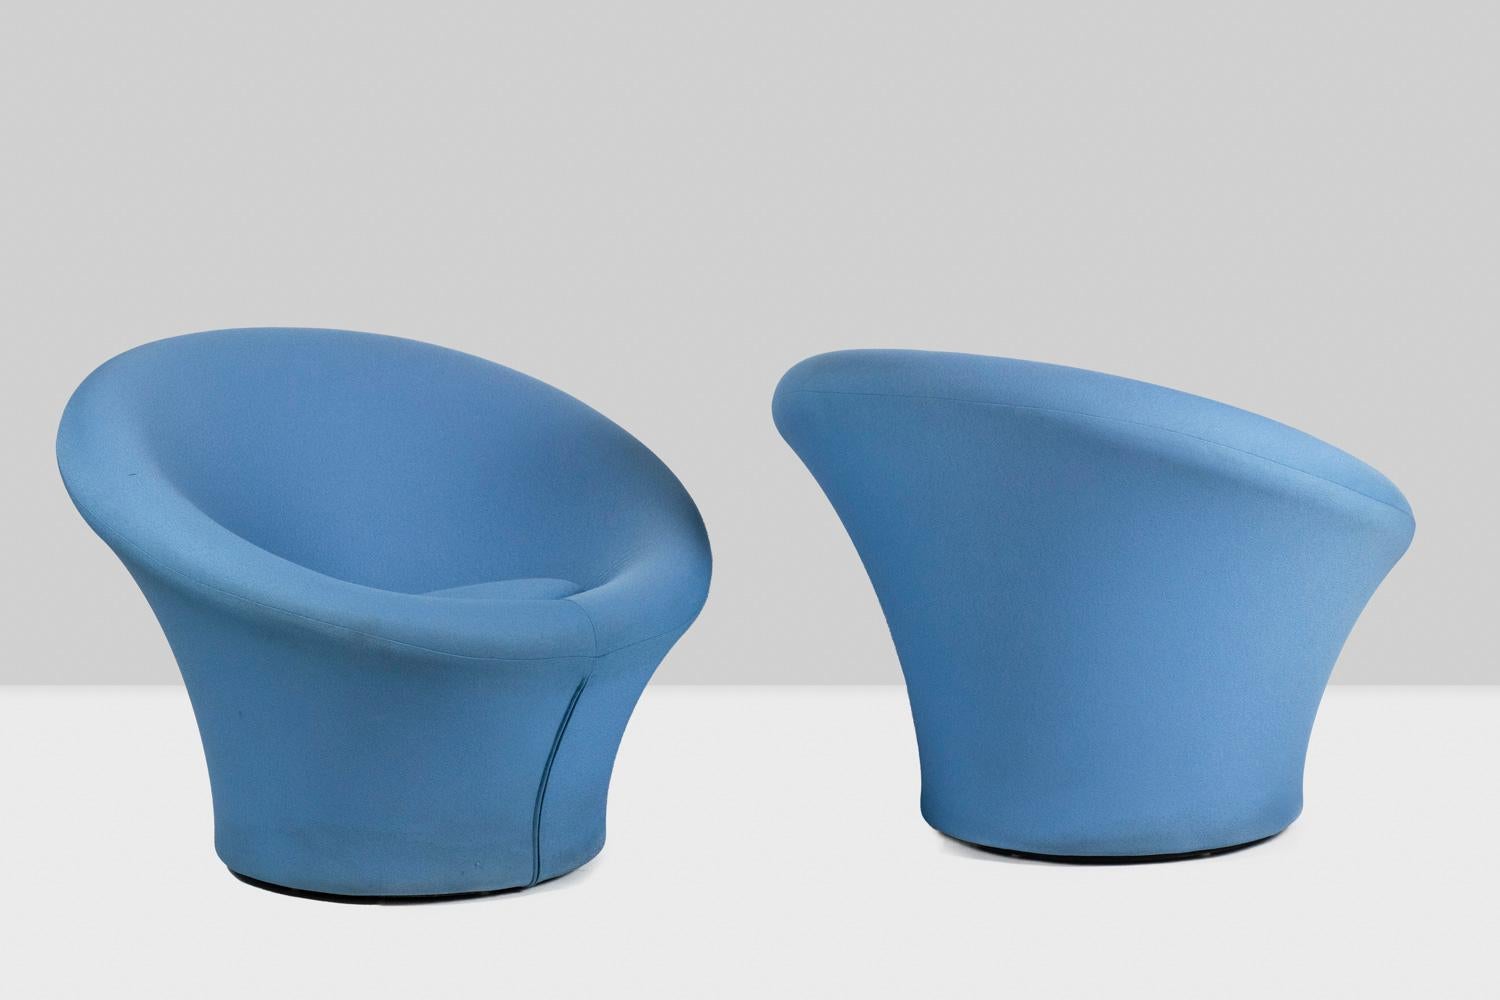 Molded Pierre Paulin for Artifort, Pair of “Mushroom” armchairs, 1970s For Sale